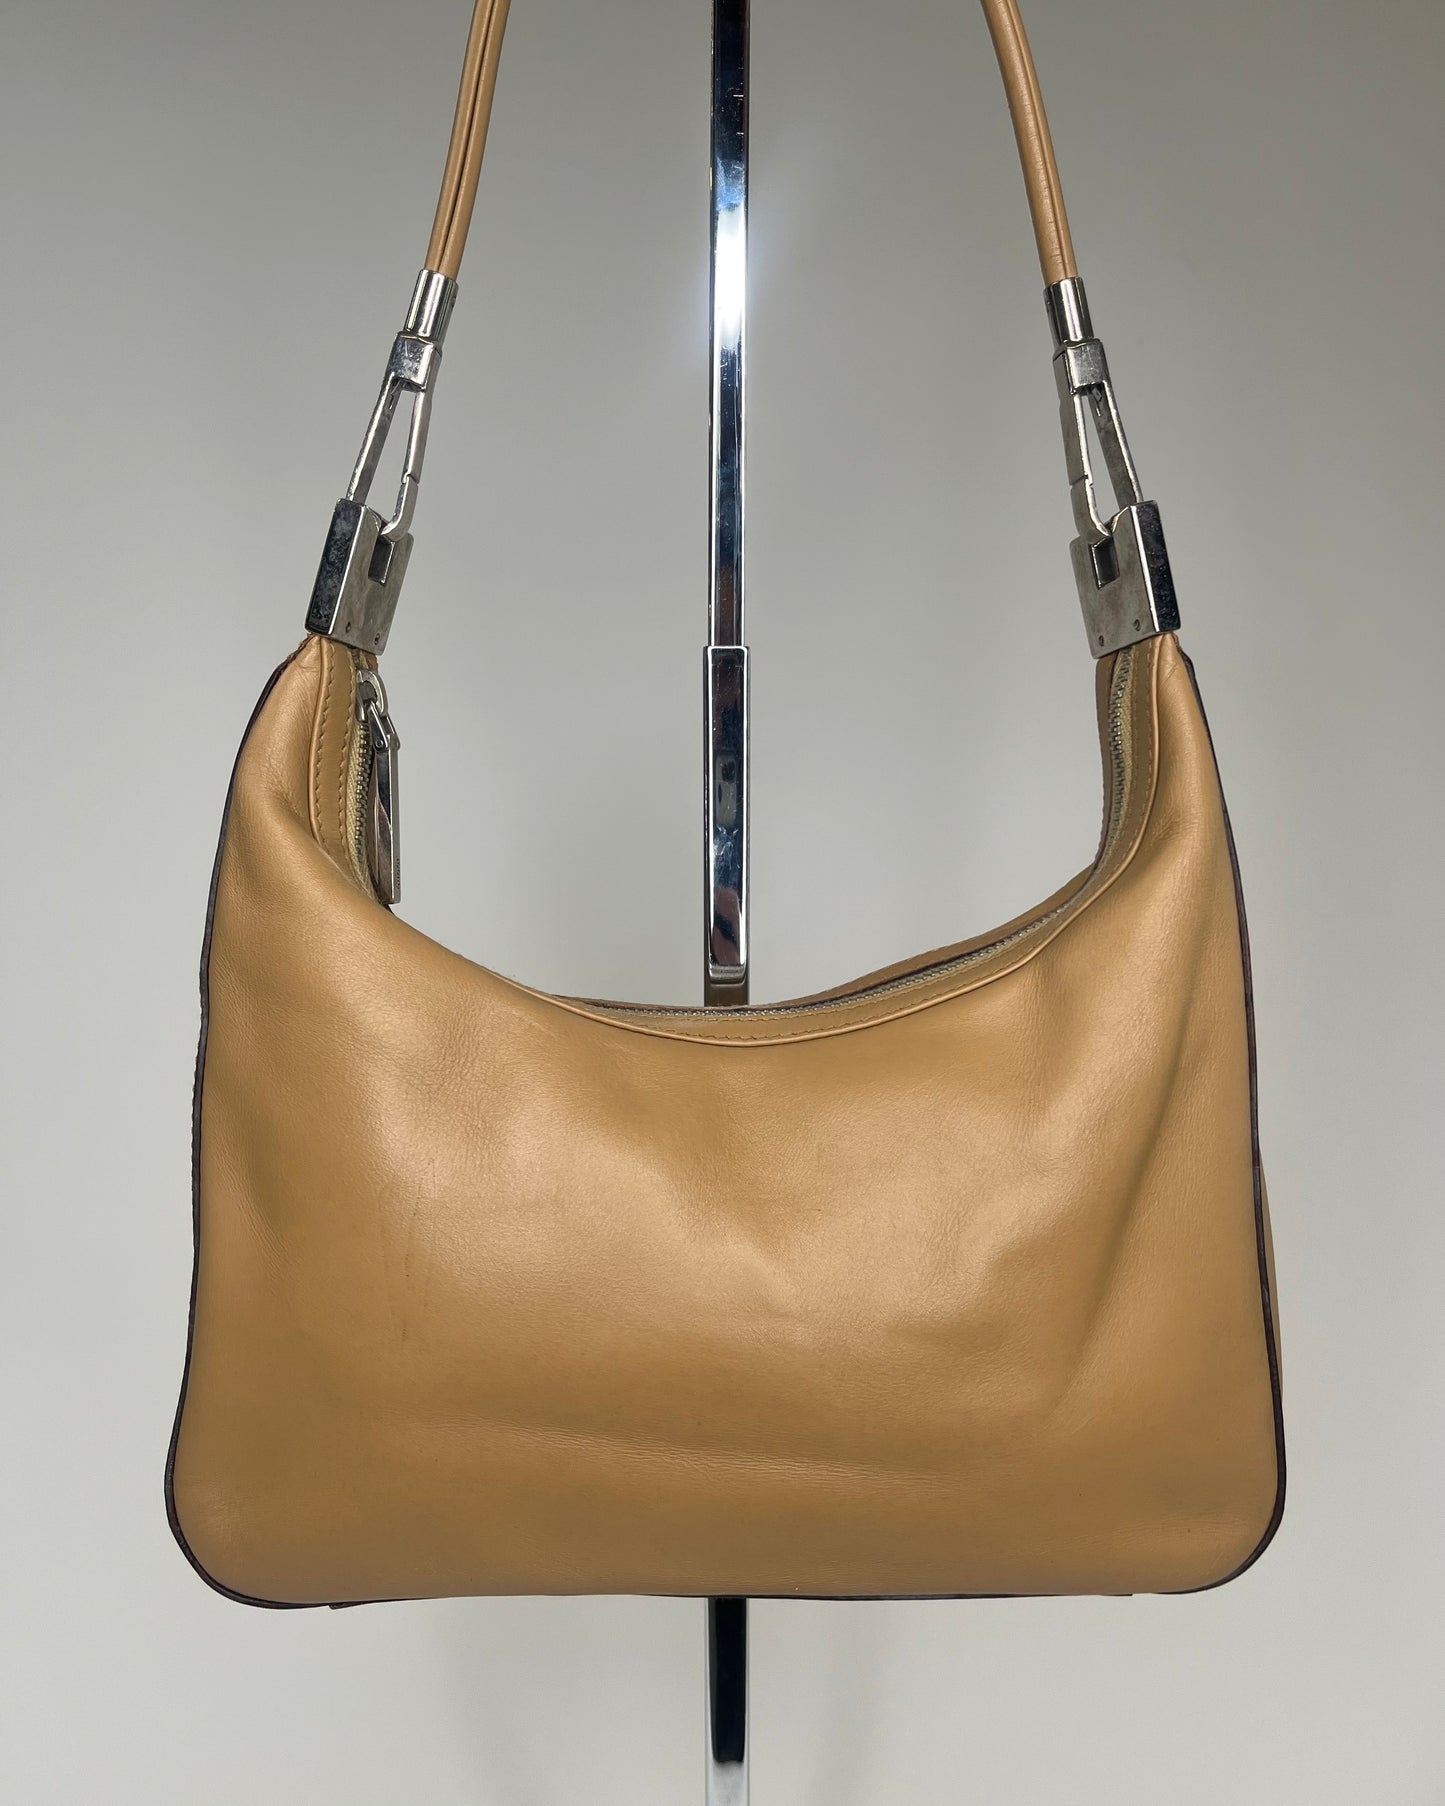 Gucci by Tom Ford Leather Shoulderbag Beige